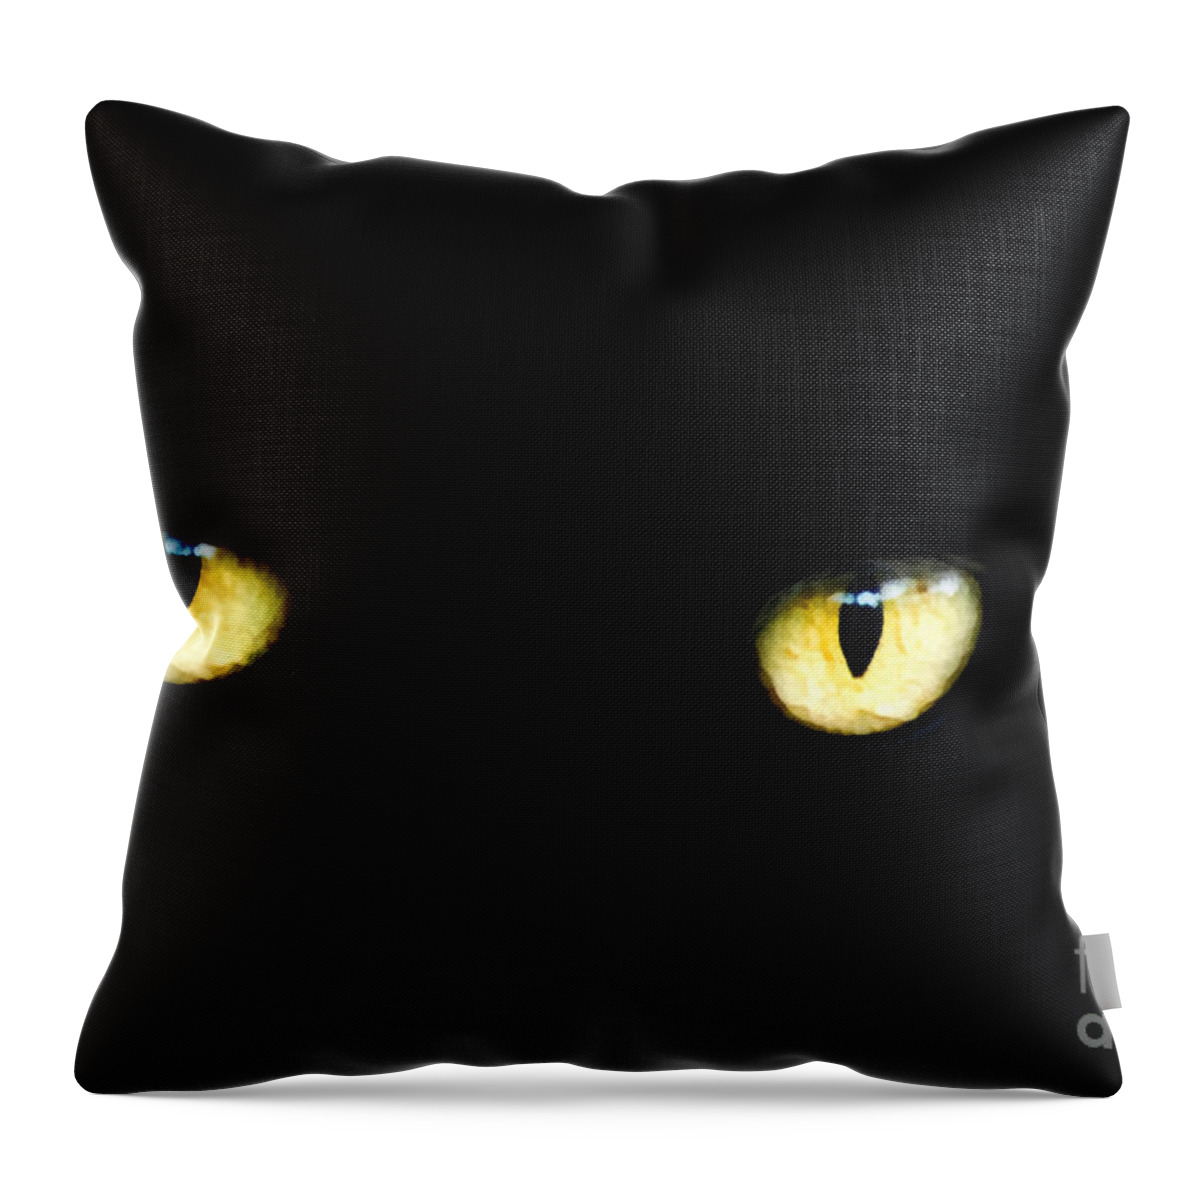 Masterpiece Throw Pillow featuring the painting Cat eyes by Vincent Monozlay